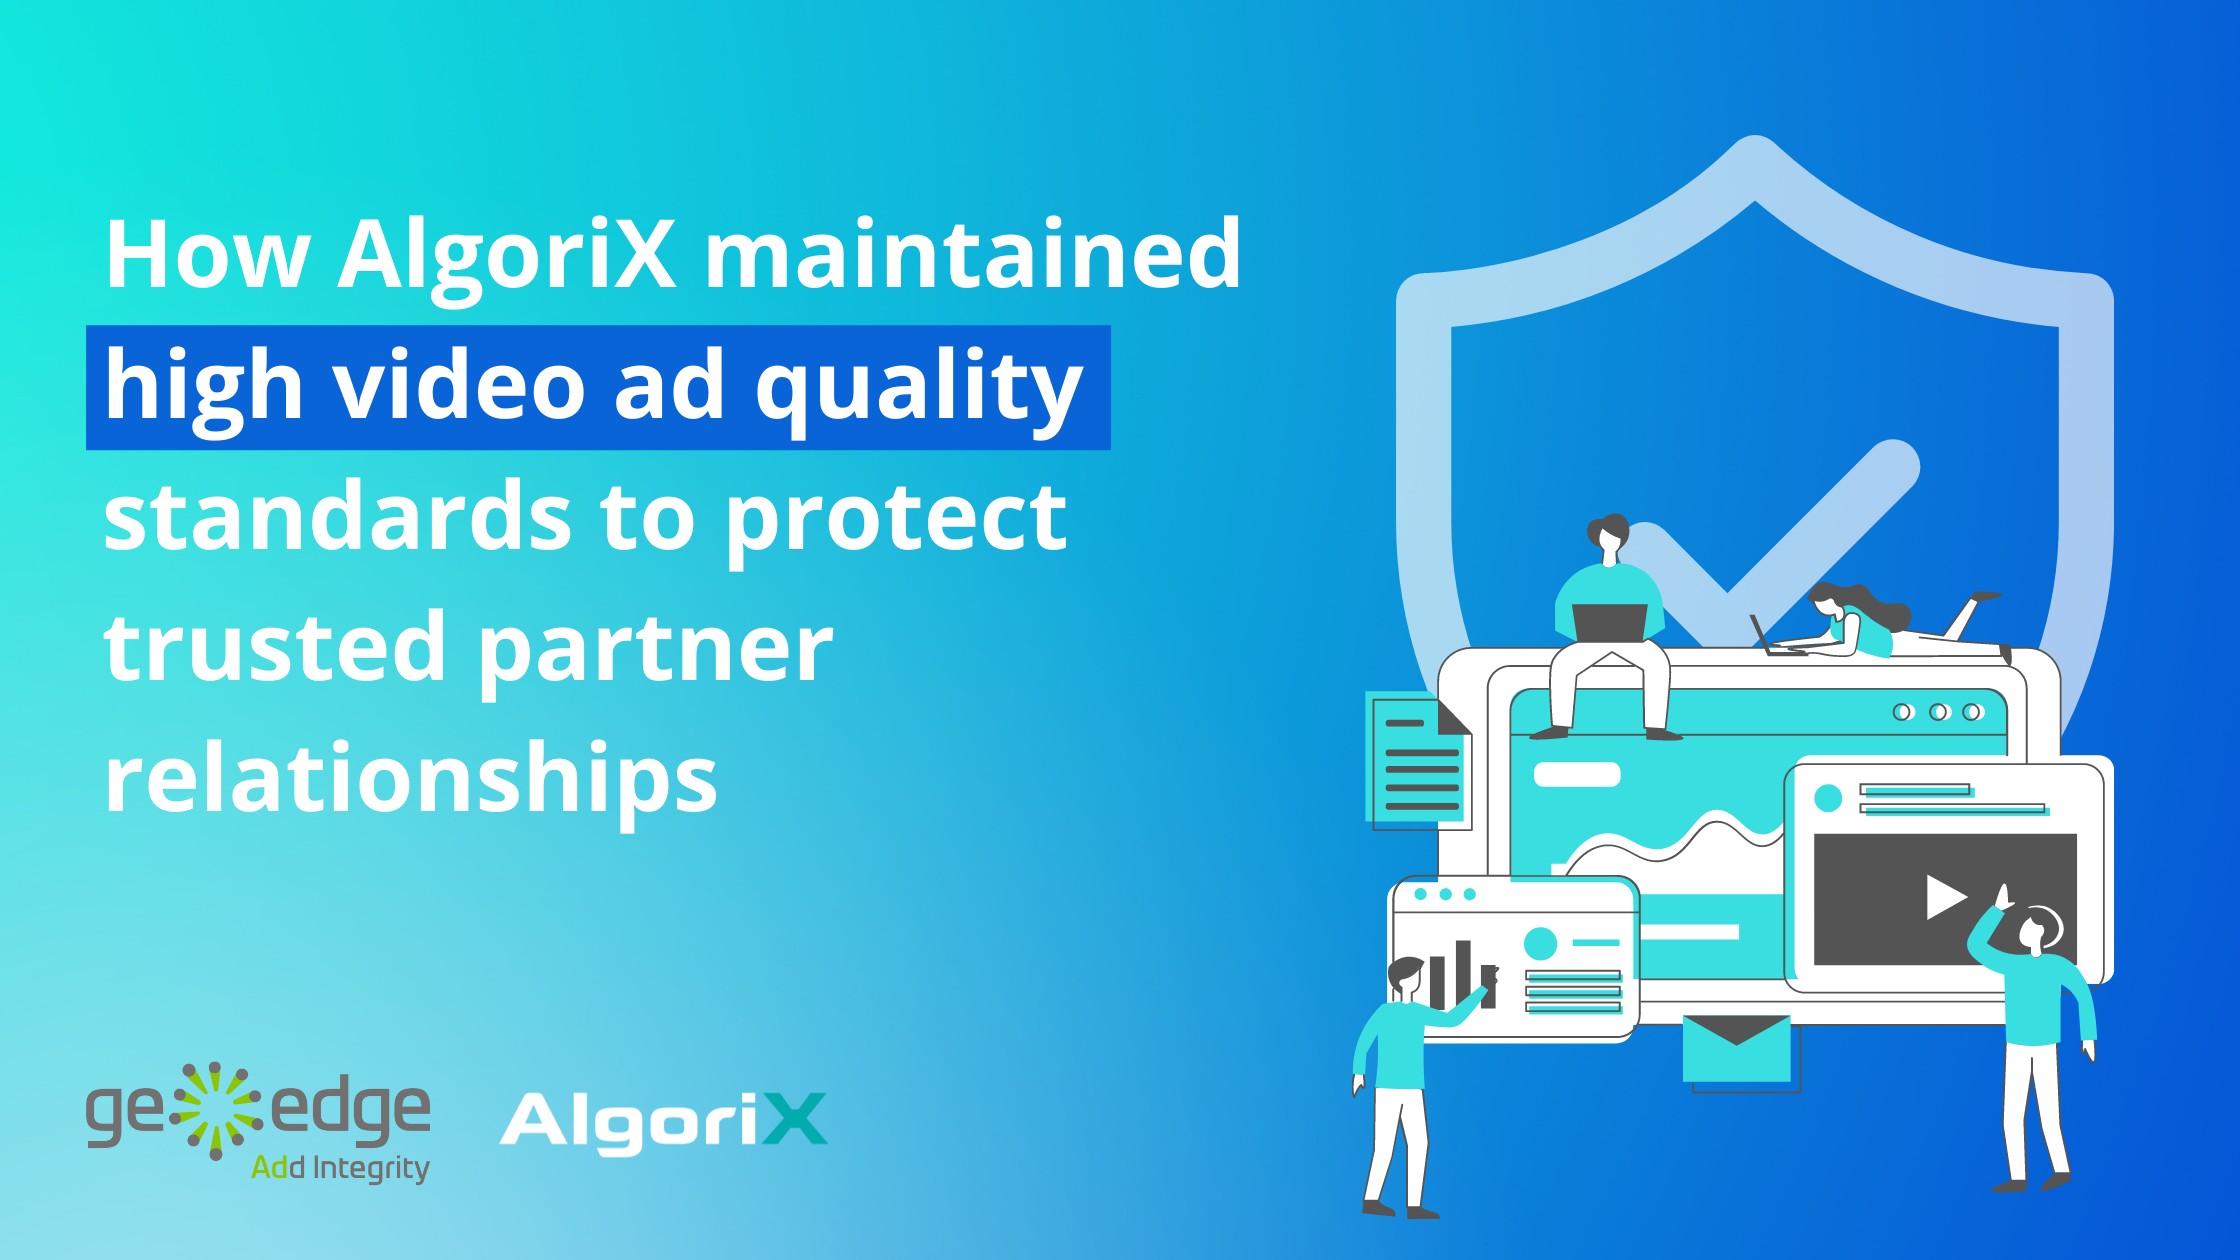 How AlgoriX maintained high video ad quality standards to protect trusted partner relationships